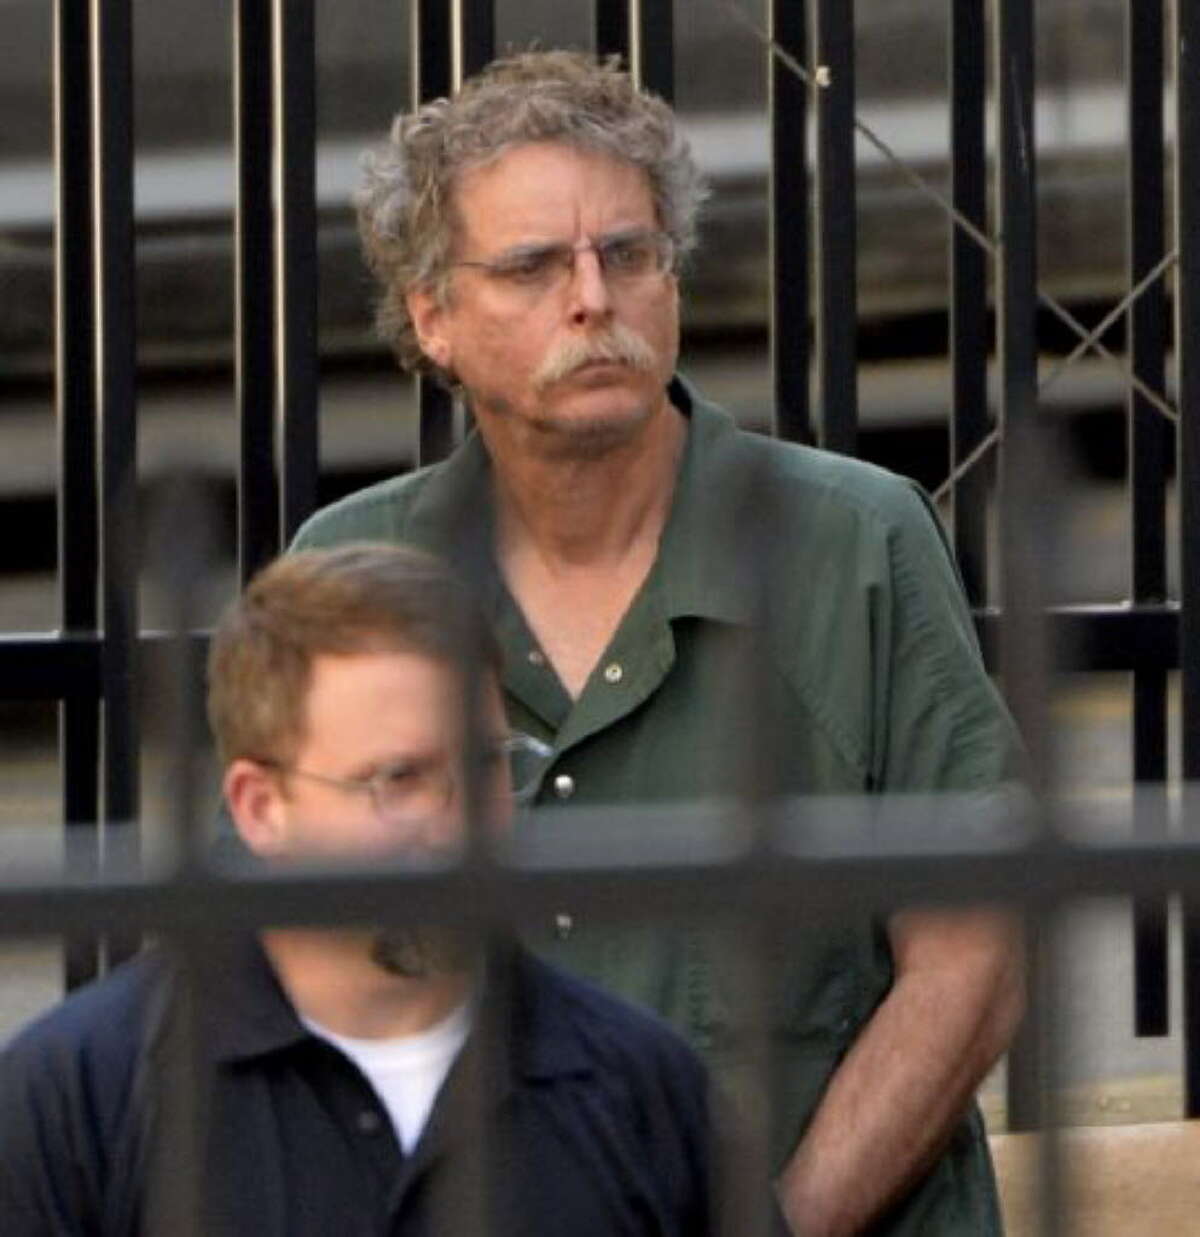 Eric J. Feight of Stockport, N.Y., leaves the Federal Courthouse in shackles after his bail was revoked Thursday afternoon, June 20, 2013, in Albany, N.Y. (Skip Dickstein/Times Union)